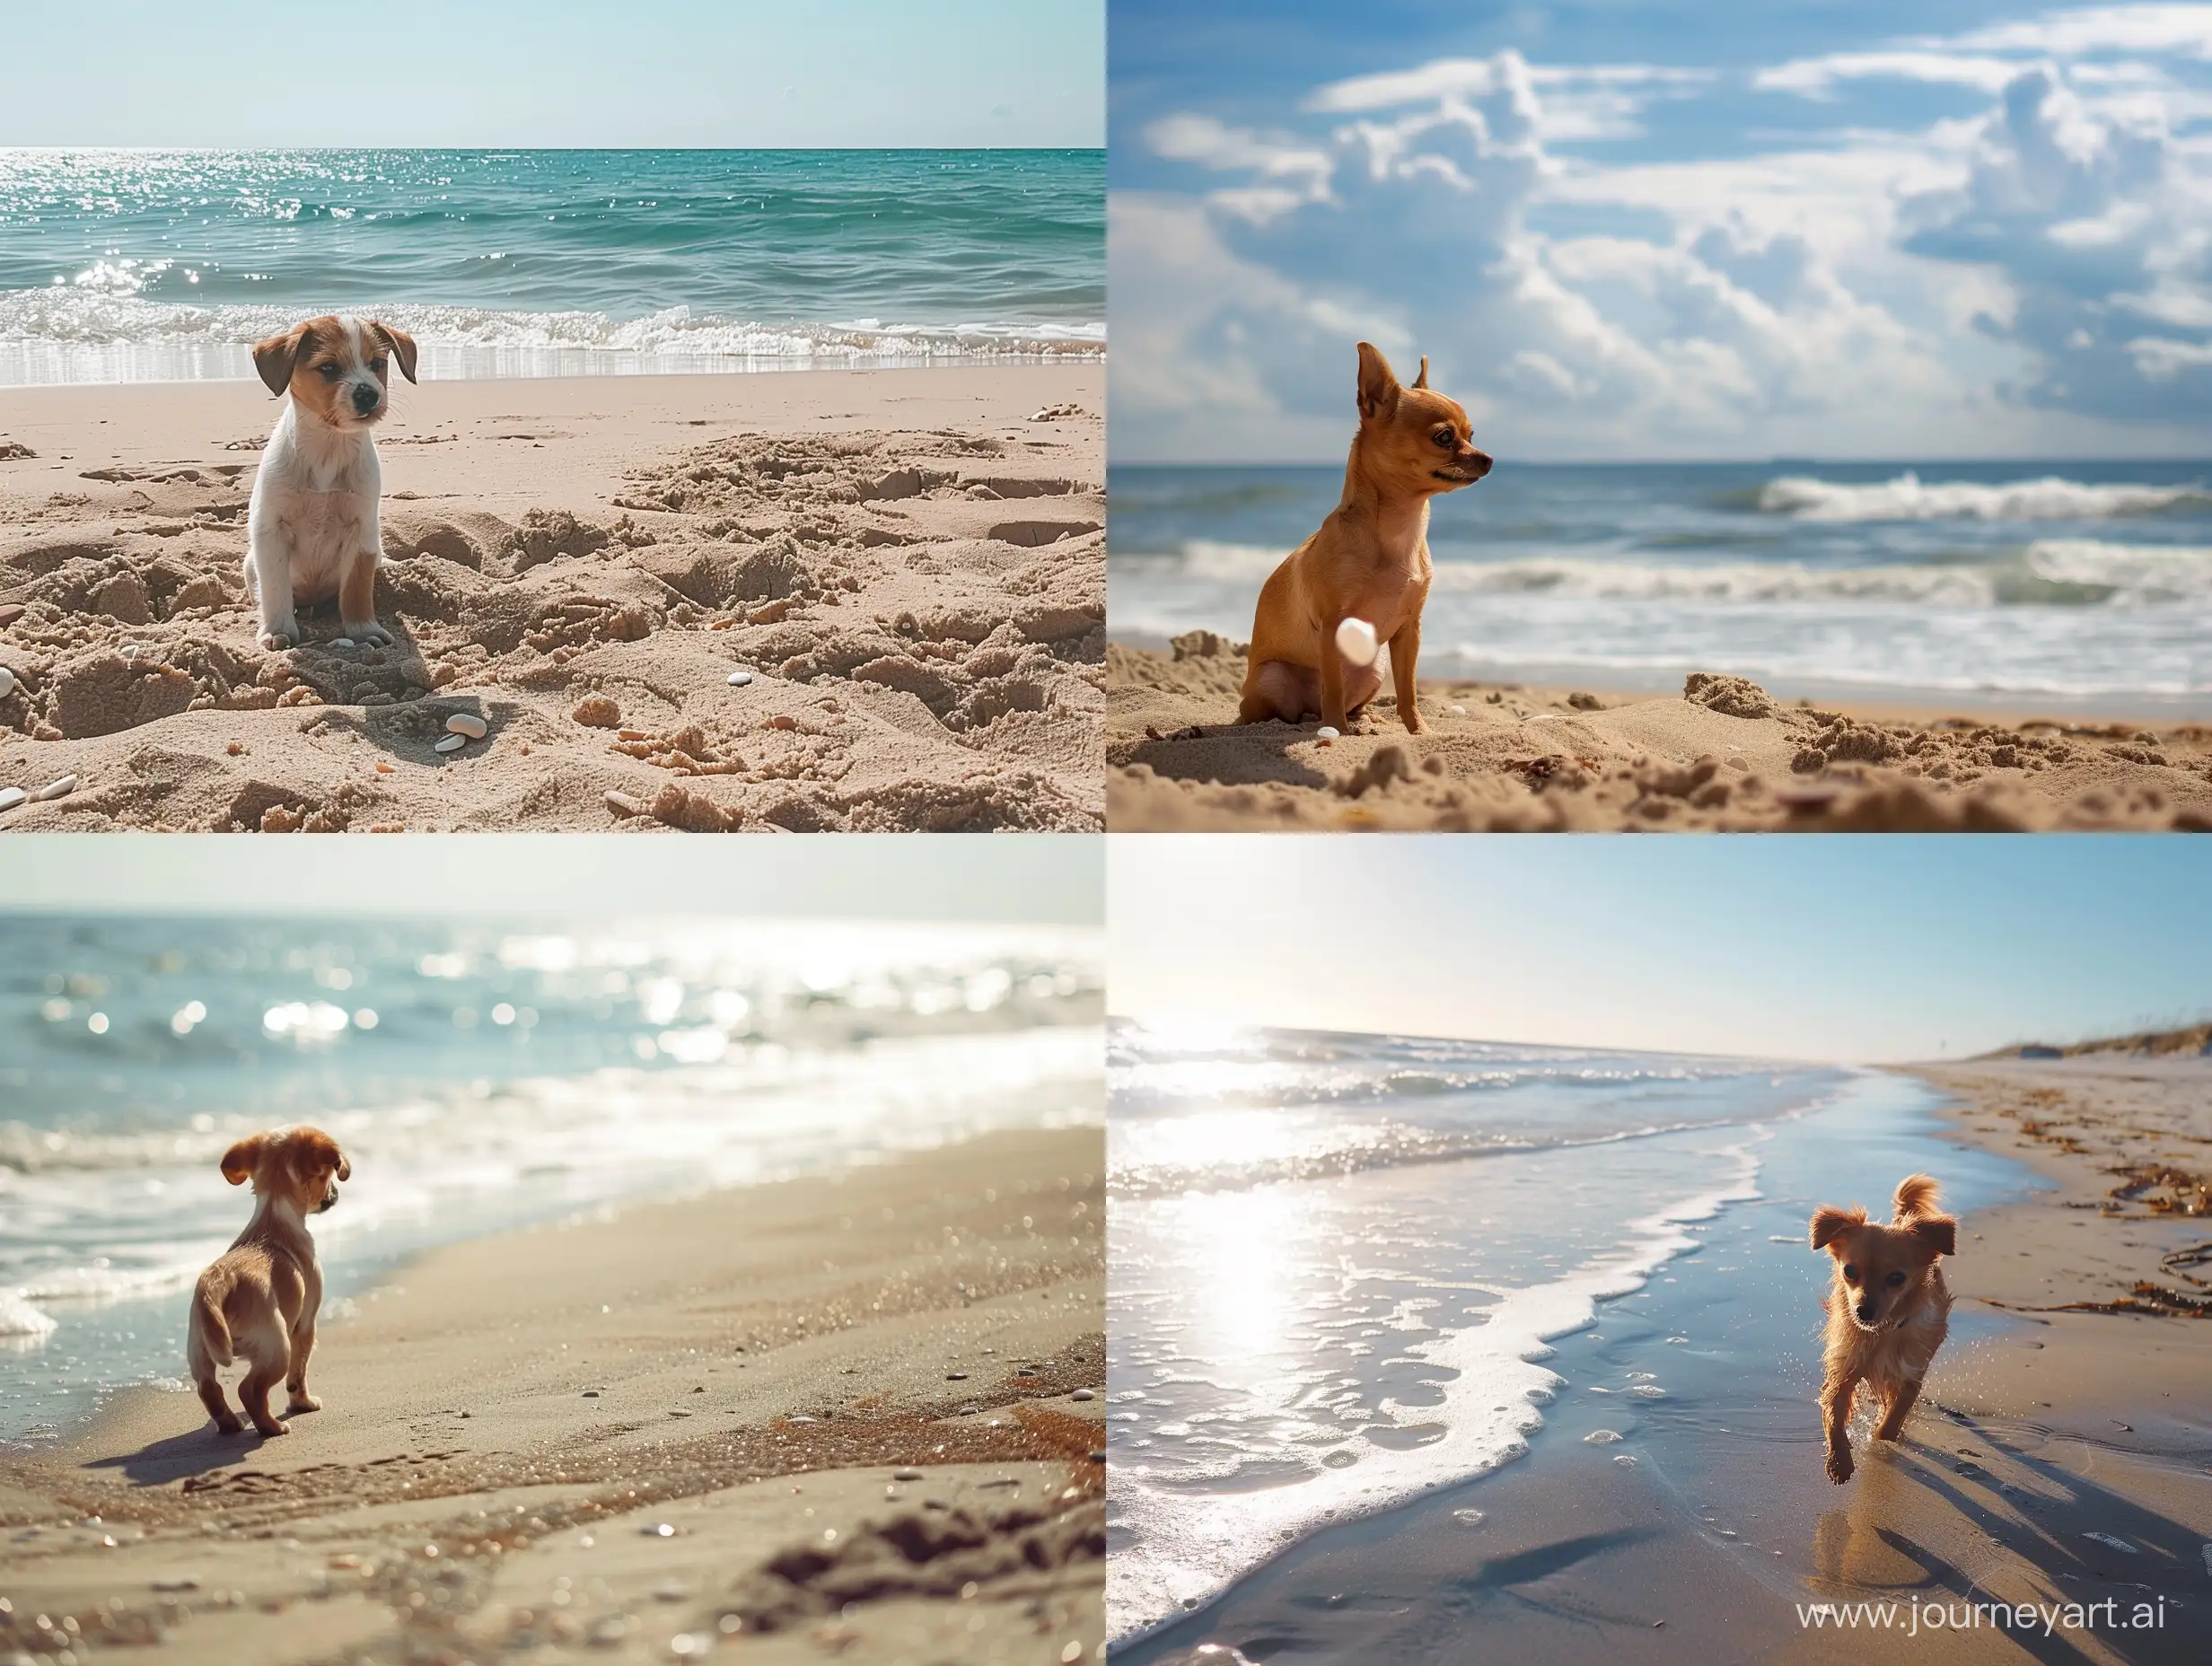 Tranquil-Beach-Scene-with-a-Playful-Dog